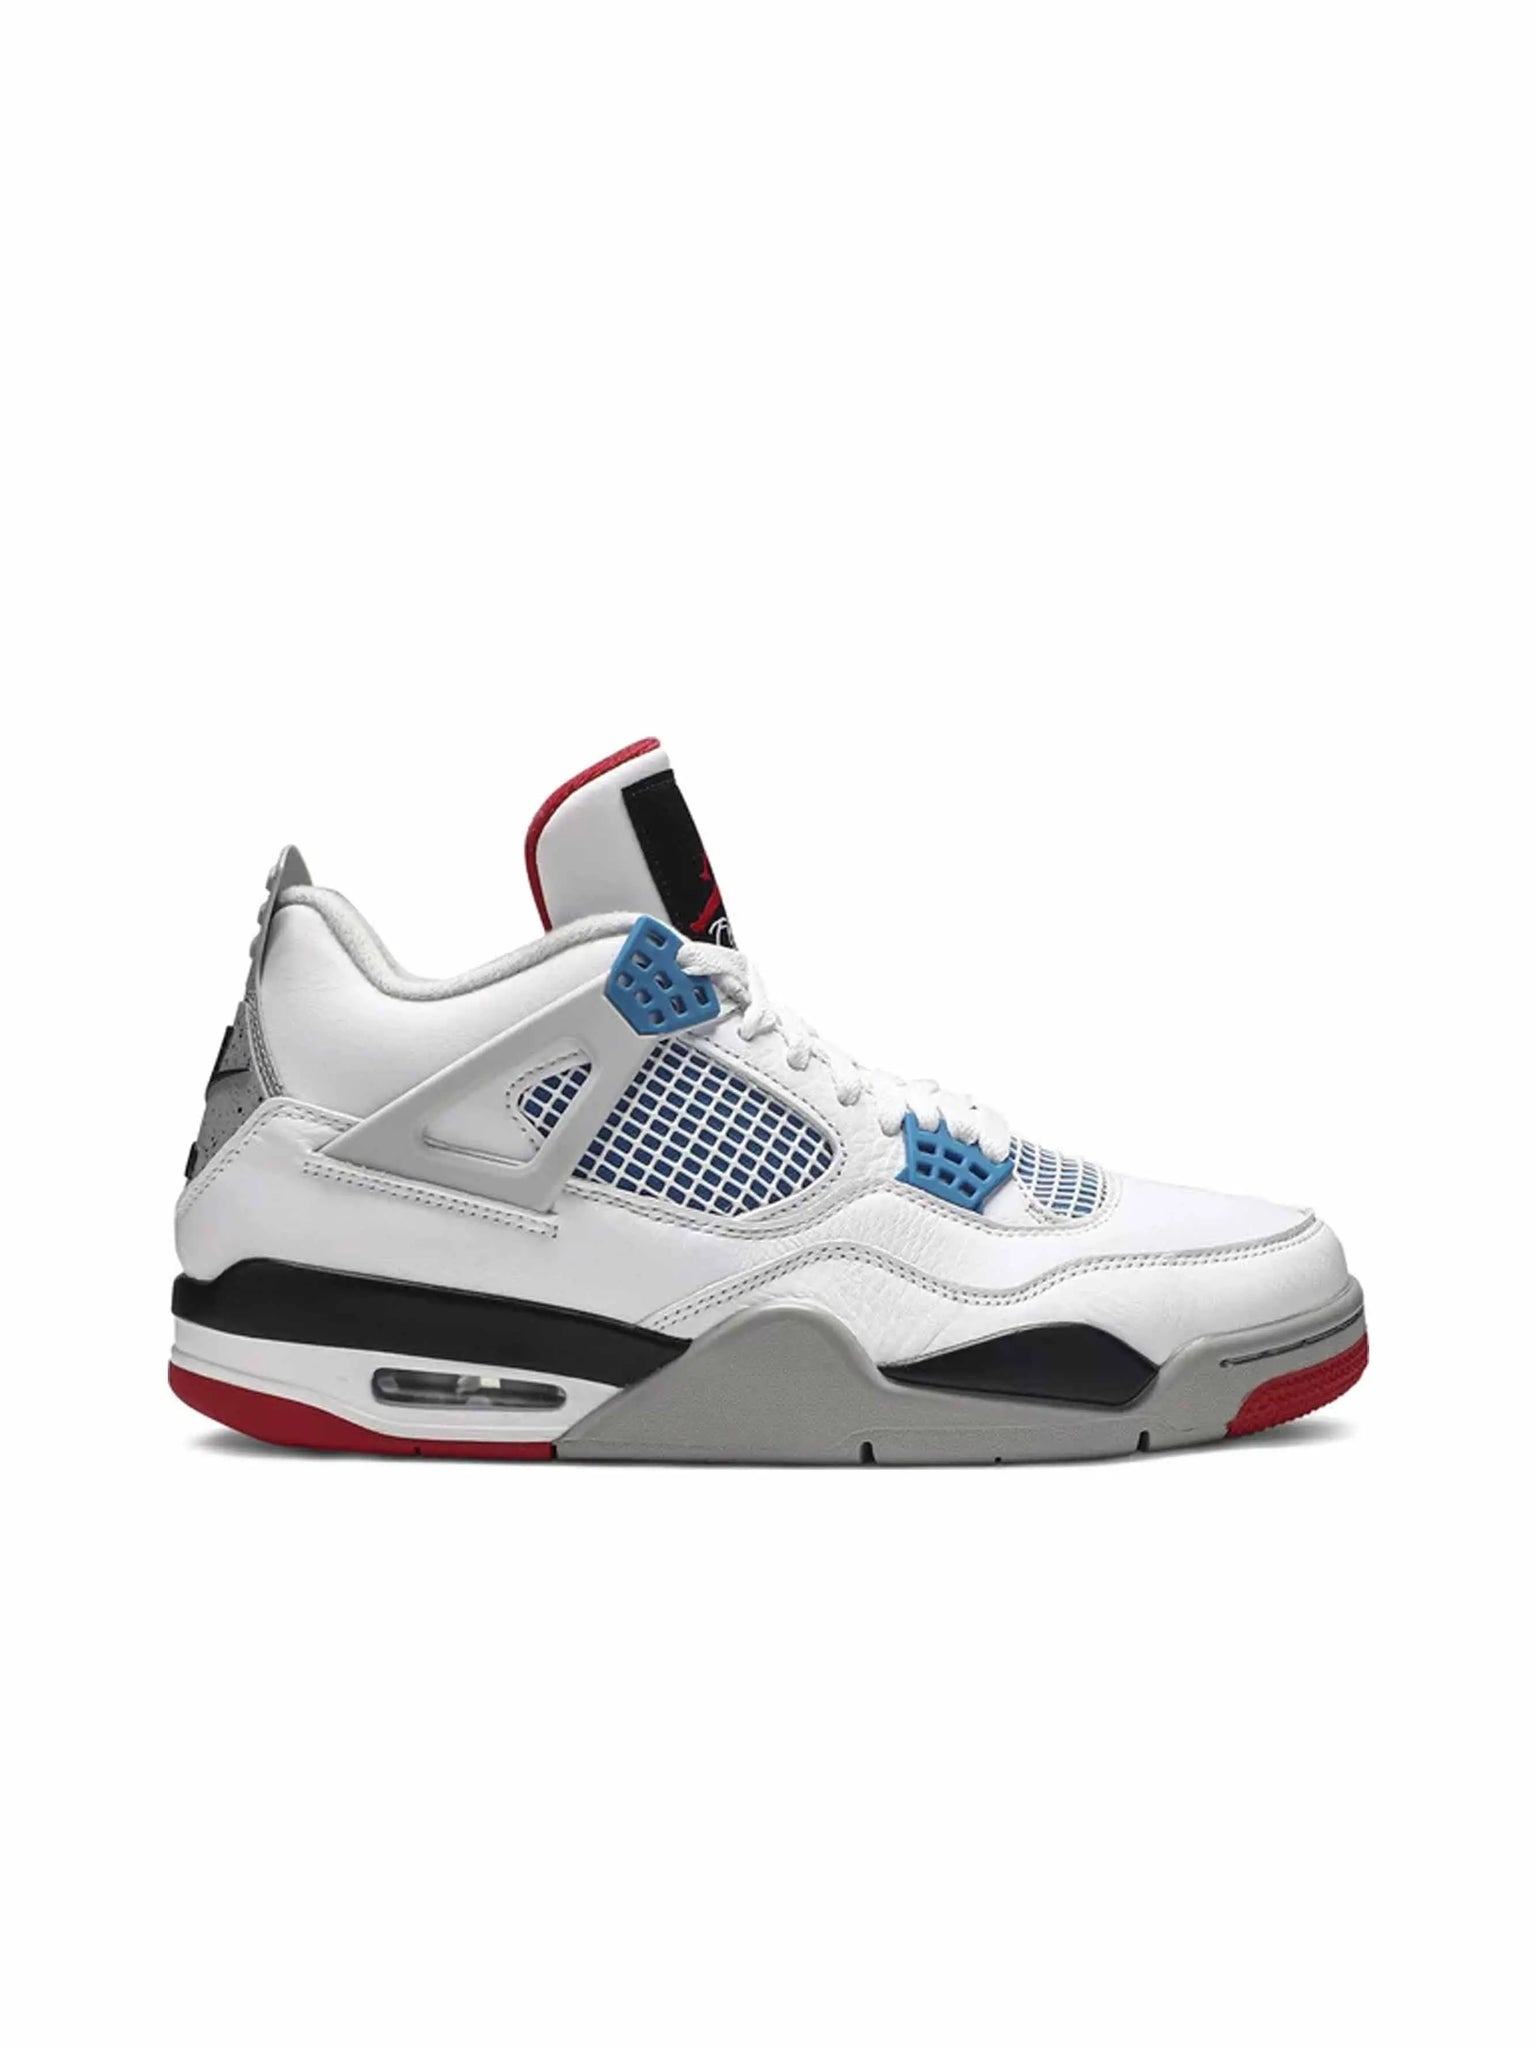 Air Jordan 4 Retro What The in Auckland, New Zealand - Shop name